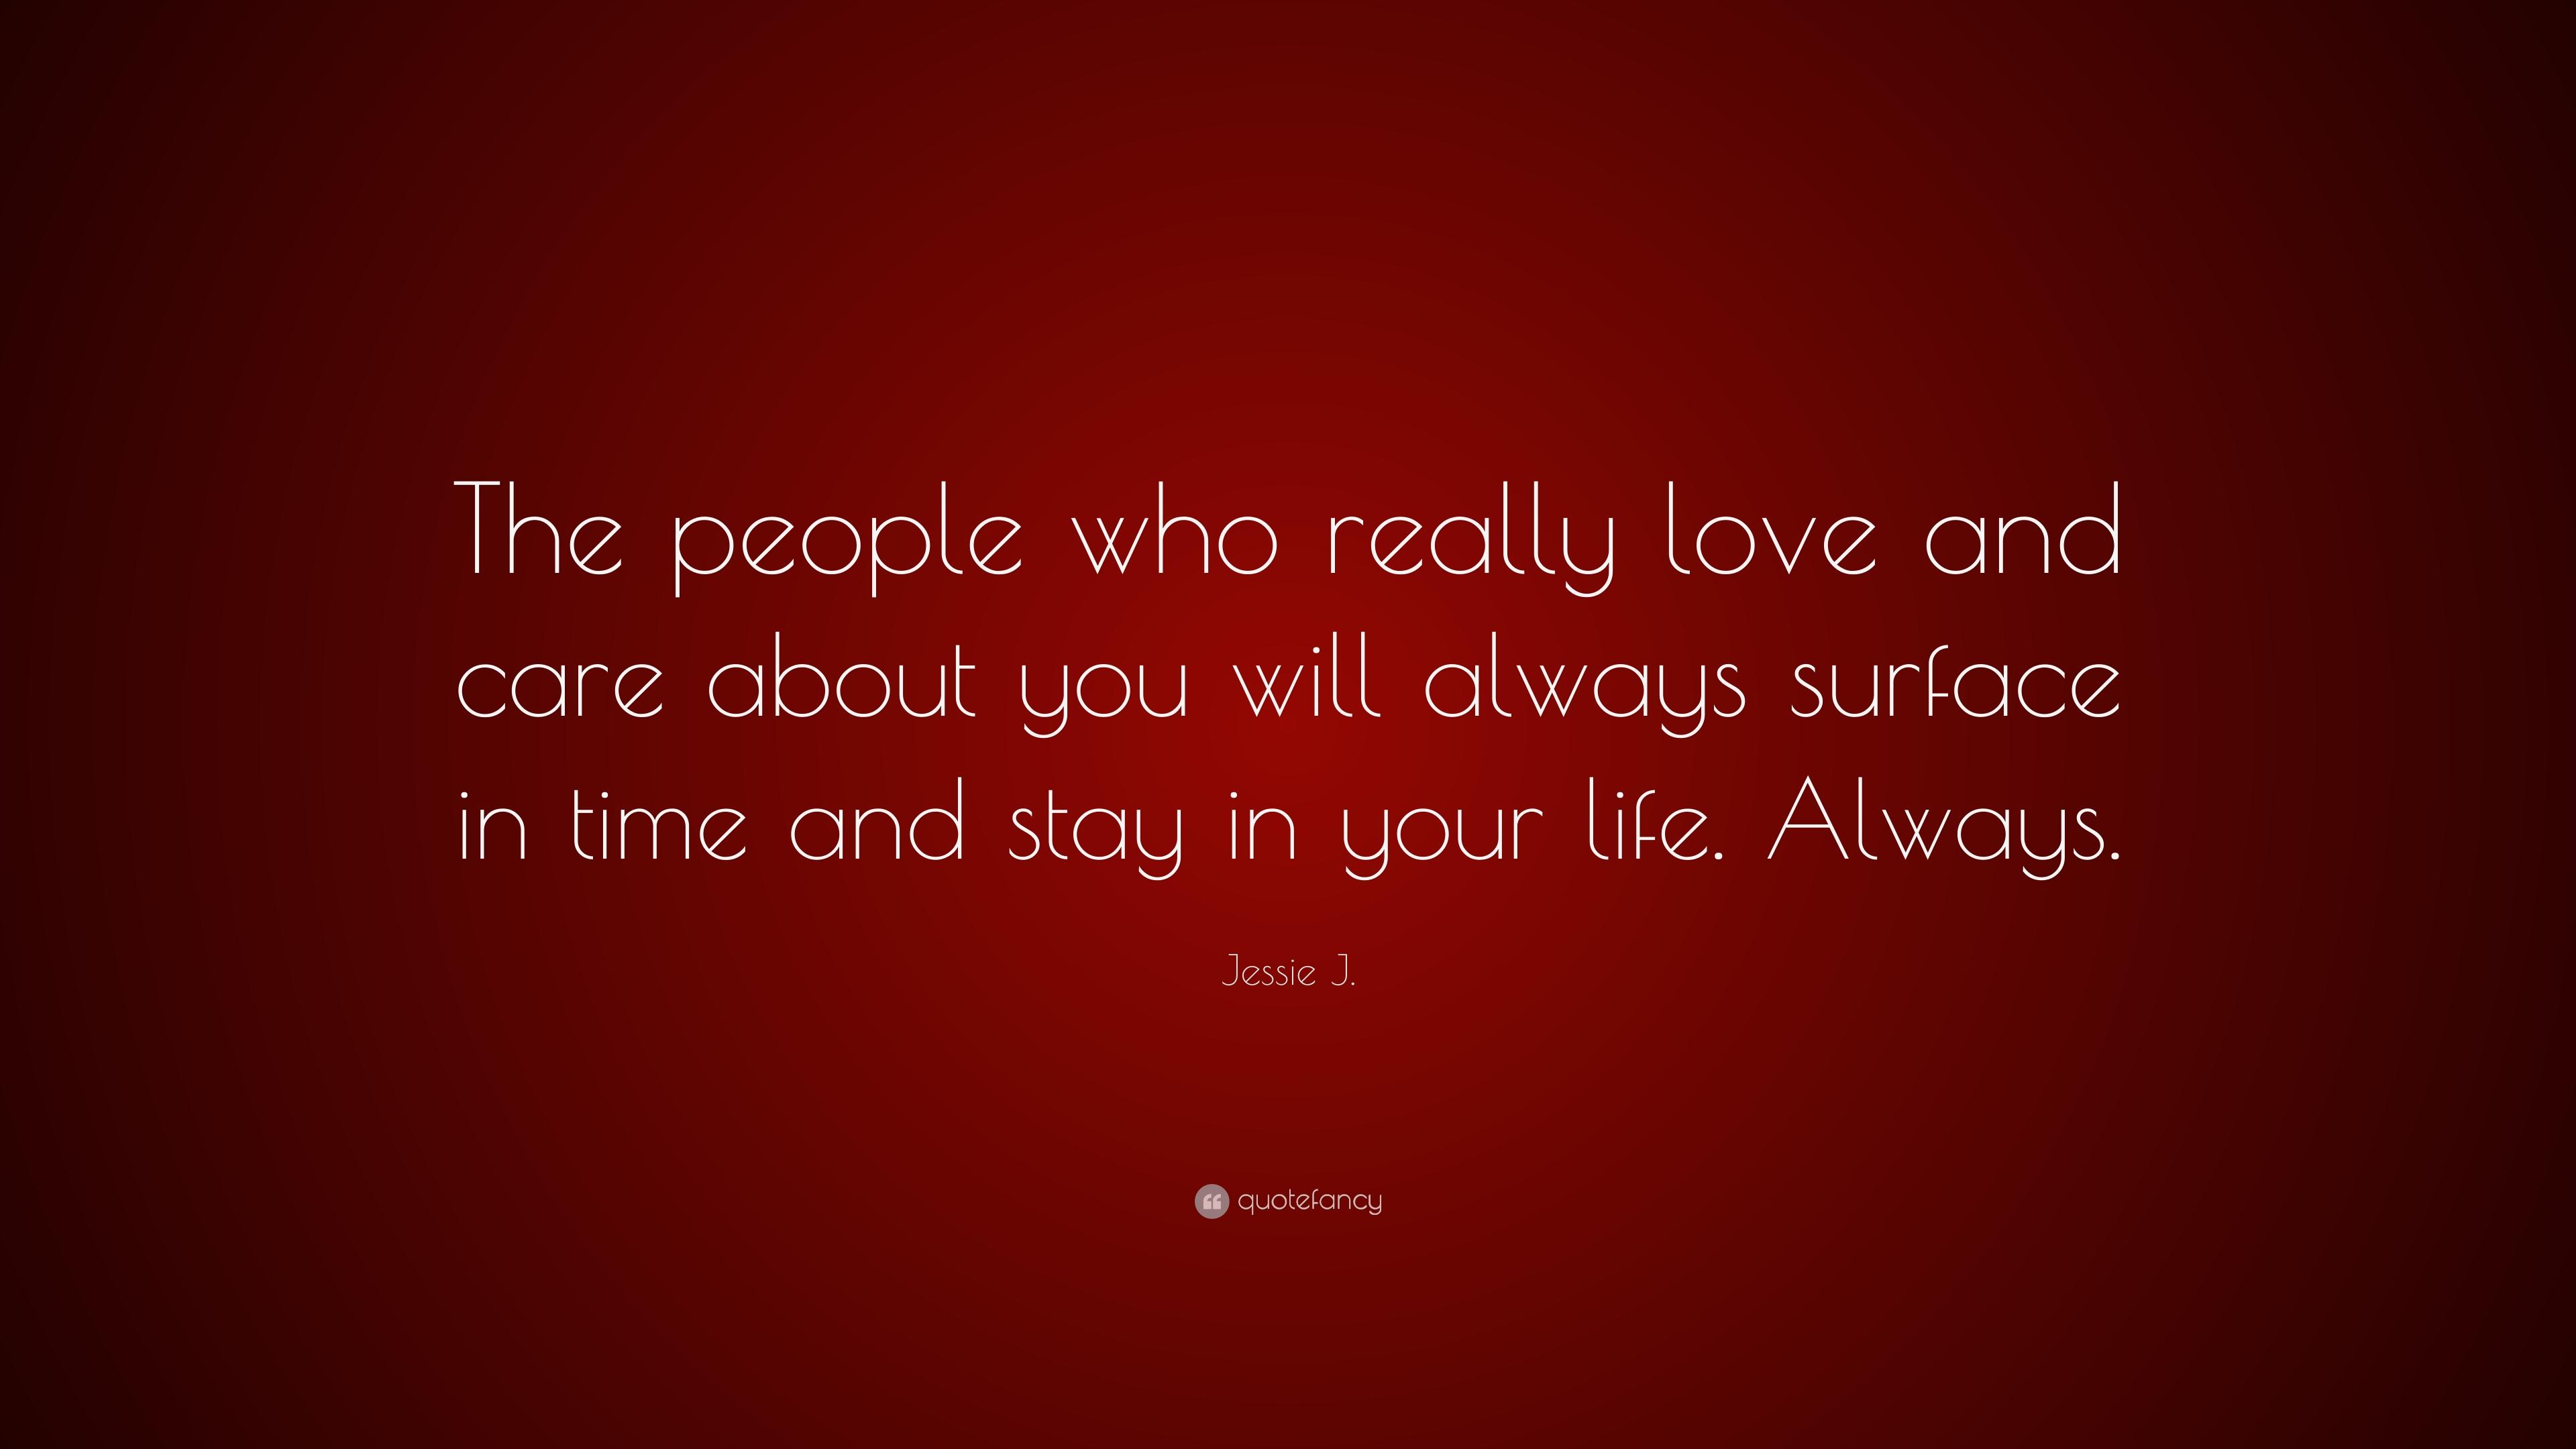 Jessie J. Quote: “The people who really love and care about you